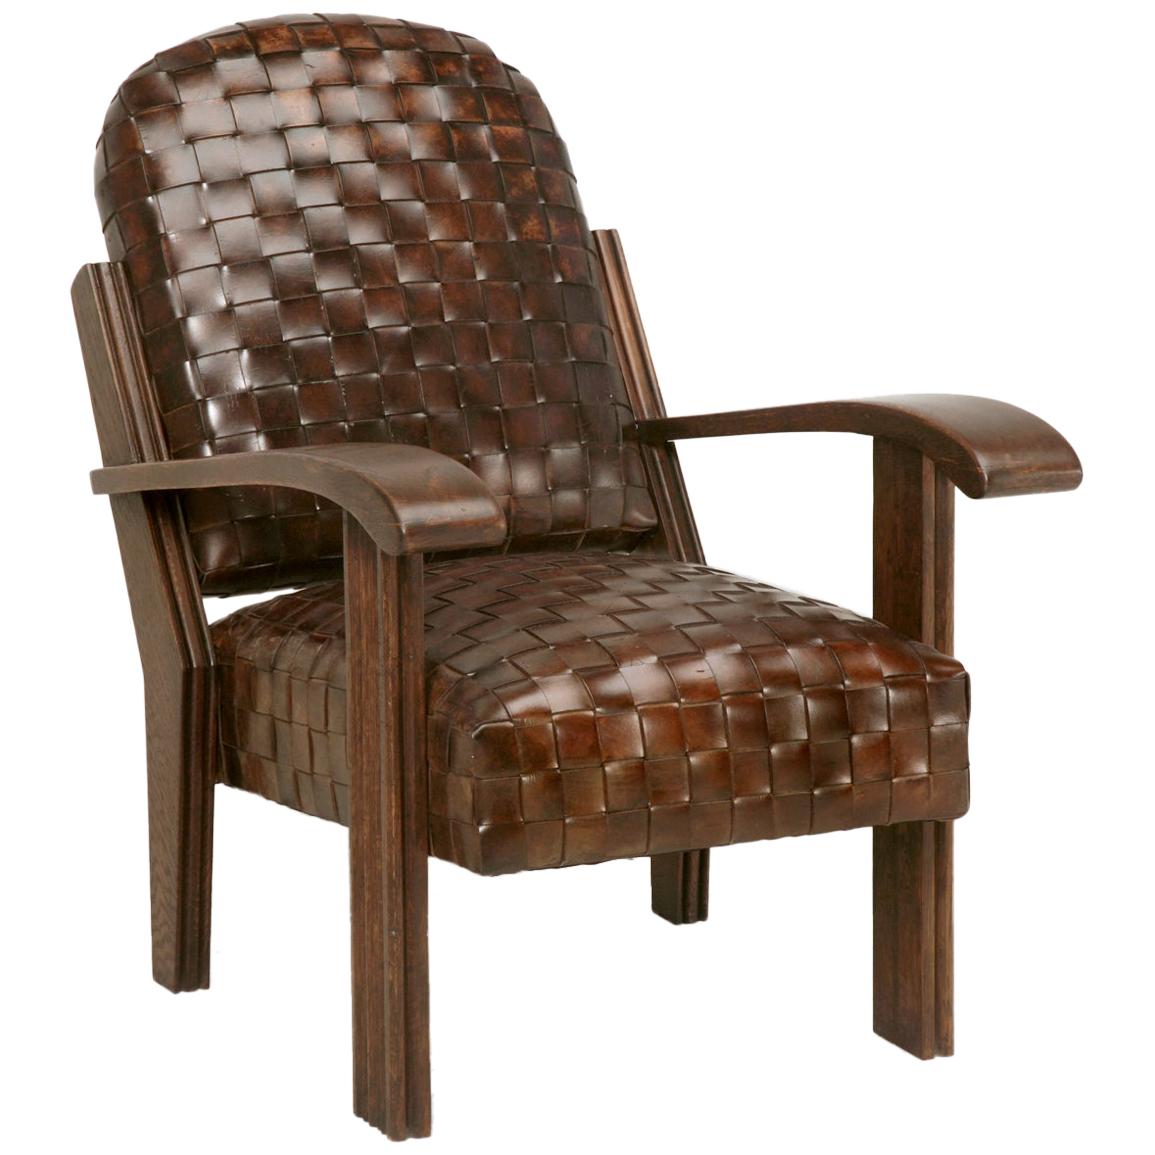 French Club Chair in Handwoven Leather Built to Your Specifications